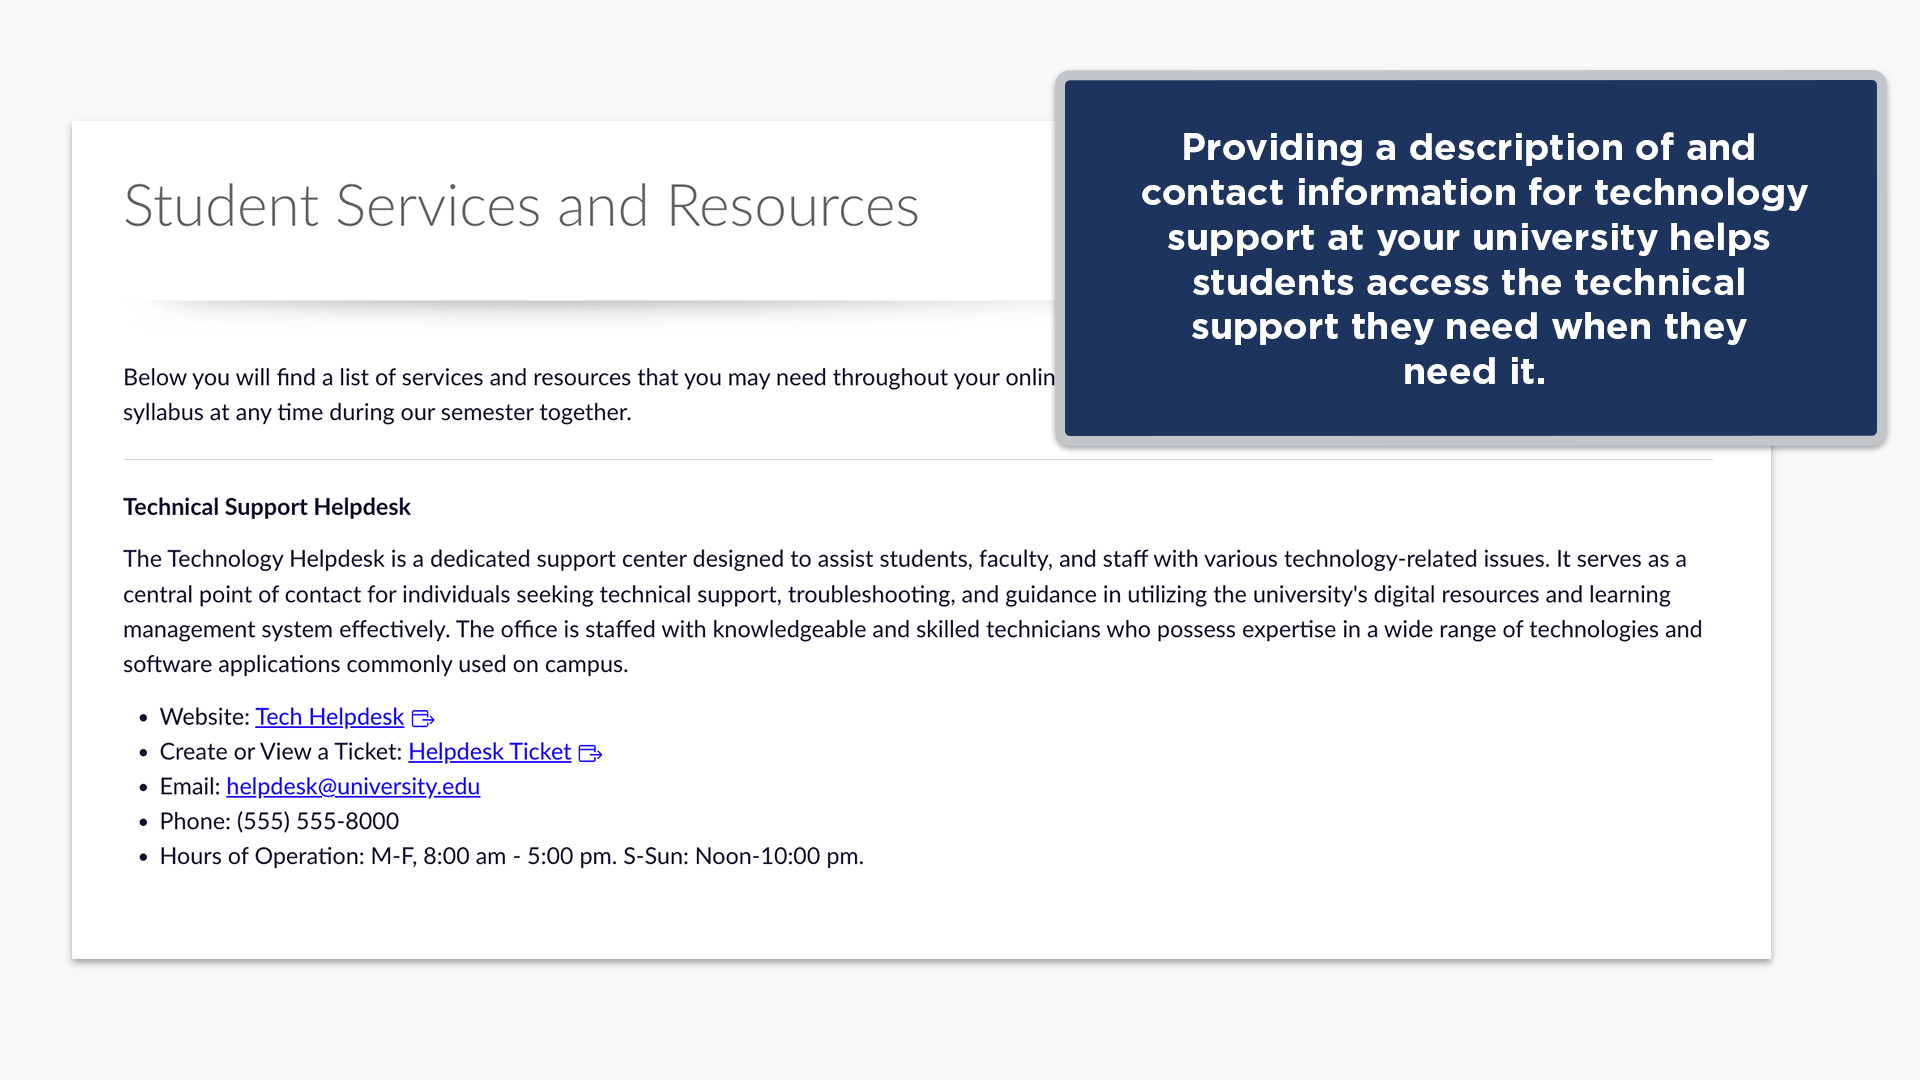 Providing a description of and contact information for technologysupport at your university helps students access the technical support they need when they need it.